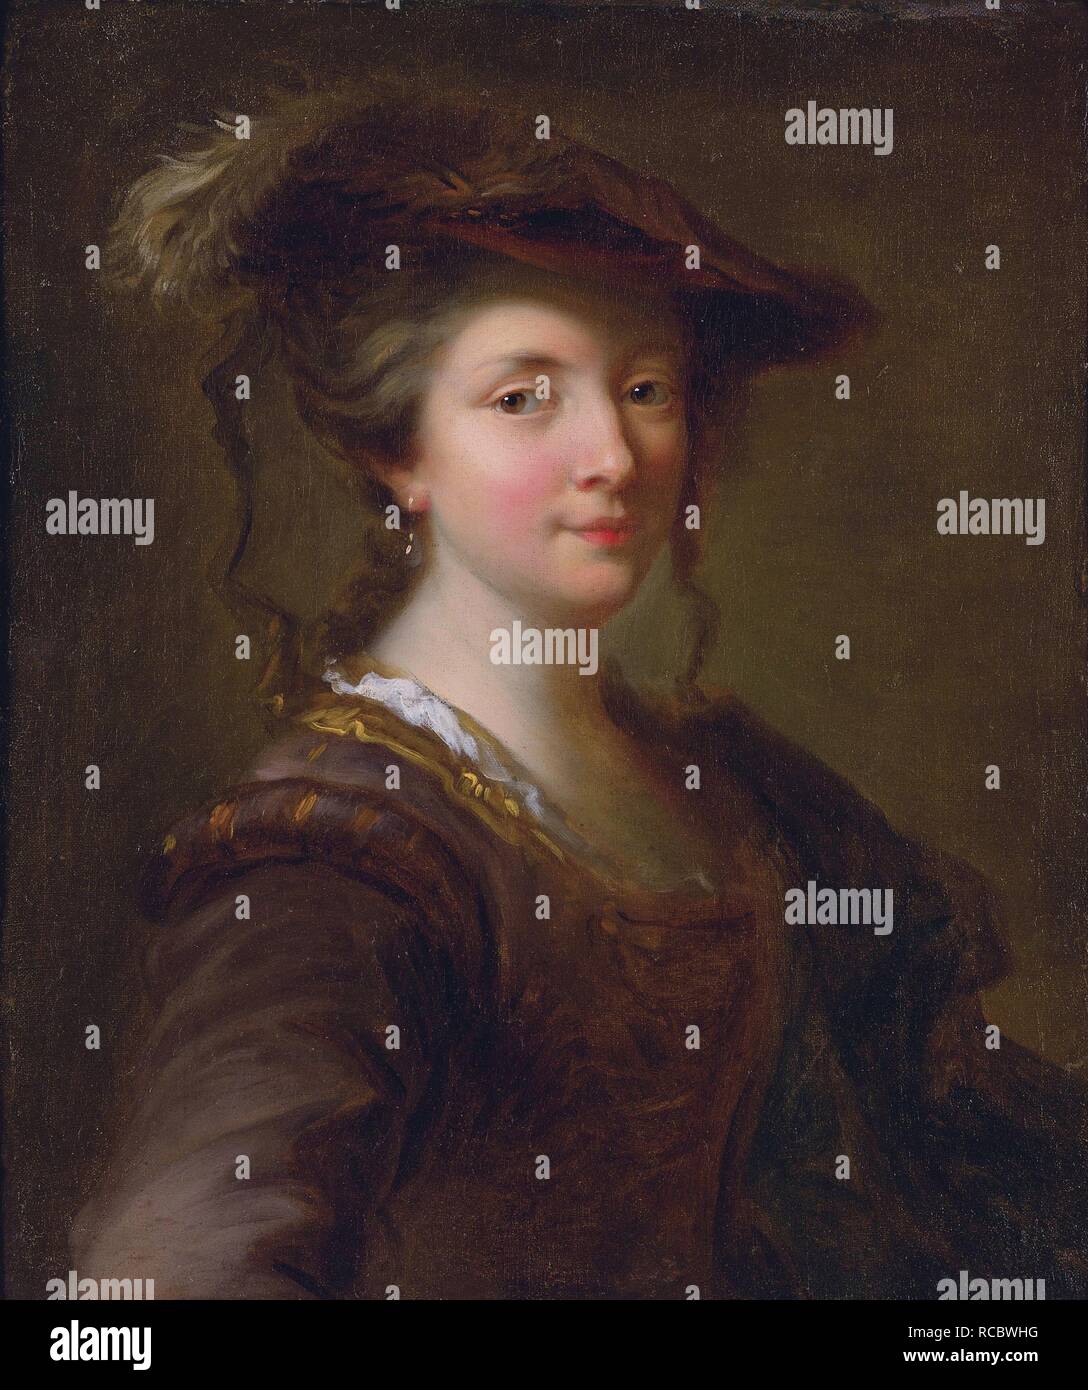 Louise Julie de Mailly-Nesle, Comtesse de Mailly (1710-1751). Museum: PRIVATE COLLECTION. Author: GRIMOU, ALEXIS. Stock Photo